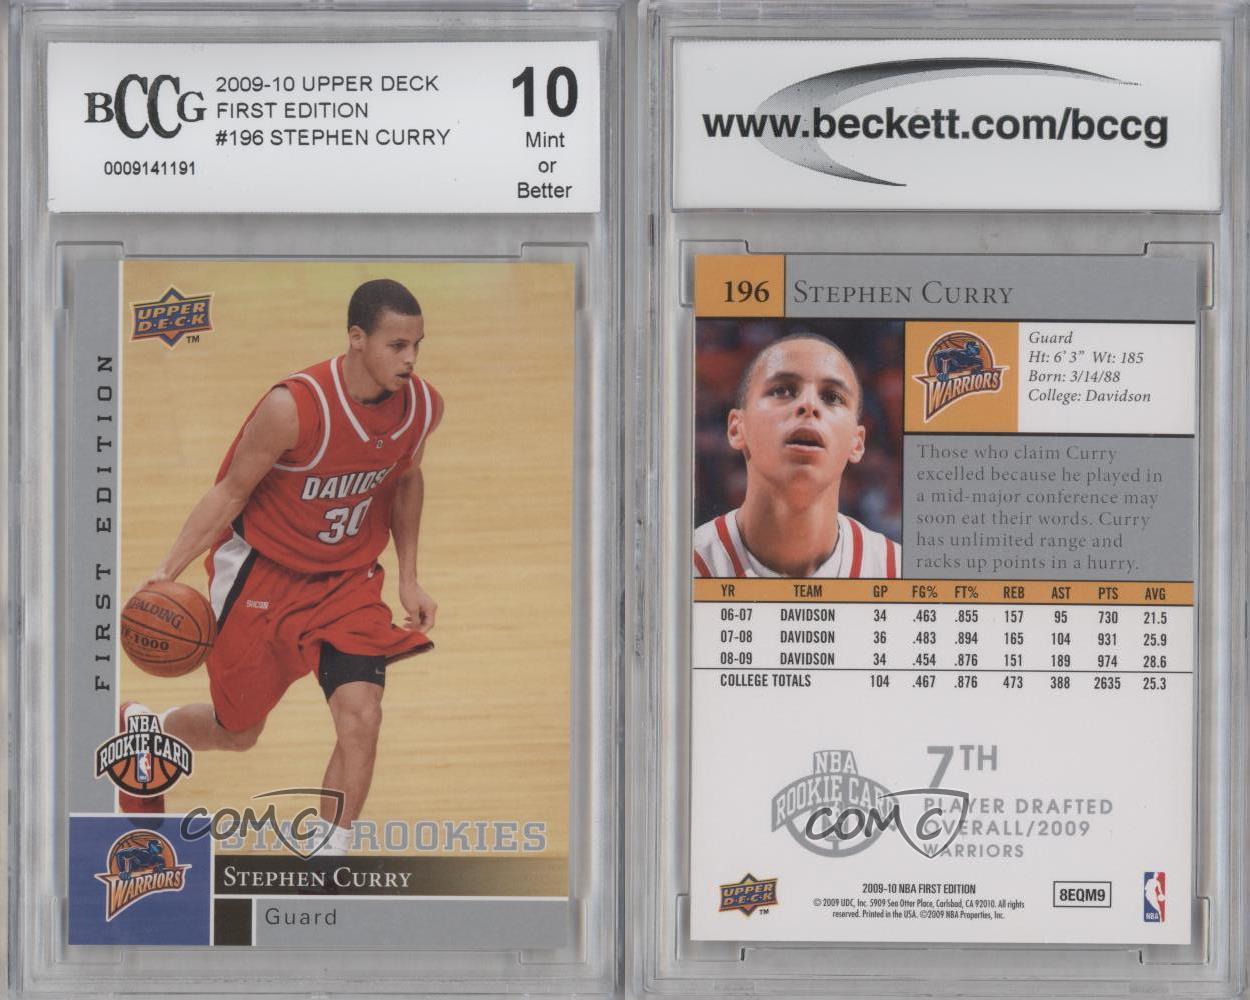 2009-10 Upper Deck First Edition #196 Stephen Curry Rookie Card Graded BCCG 10 